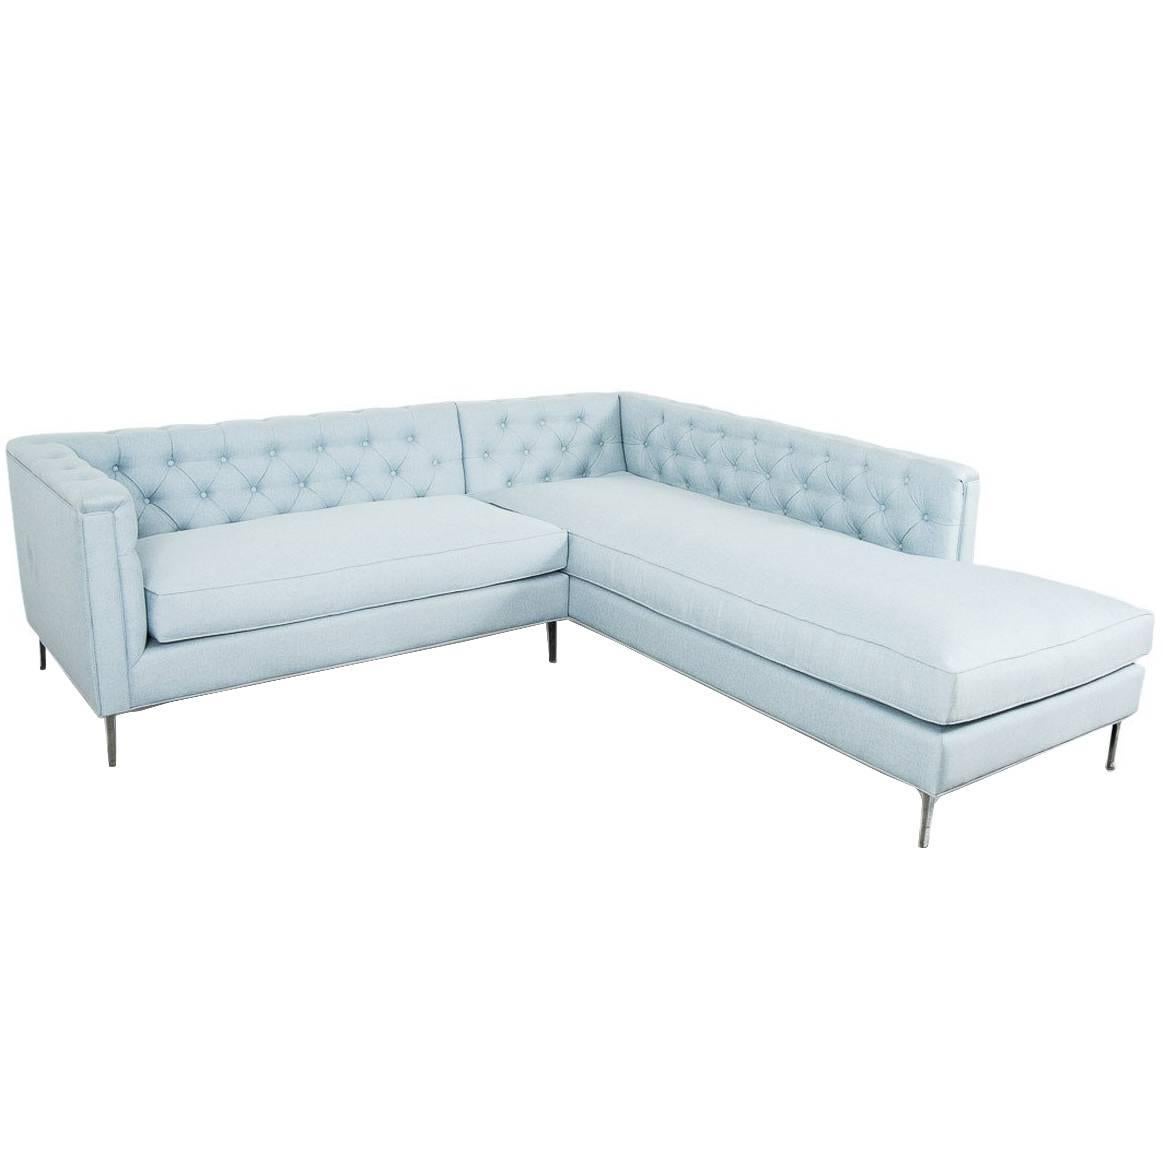 Mid-Century Modern Style Tufted Sectional with Chrome Legs in Ice Blue Linen For Sale